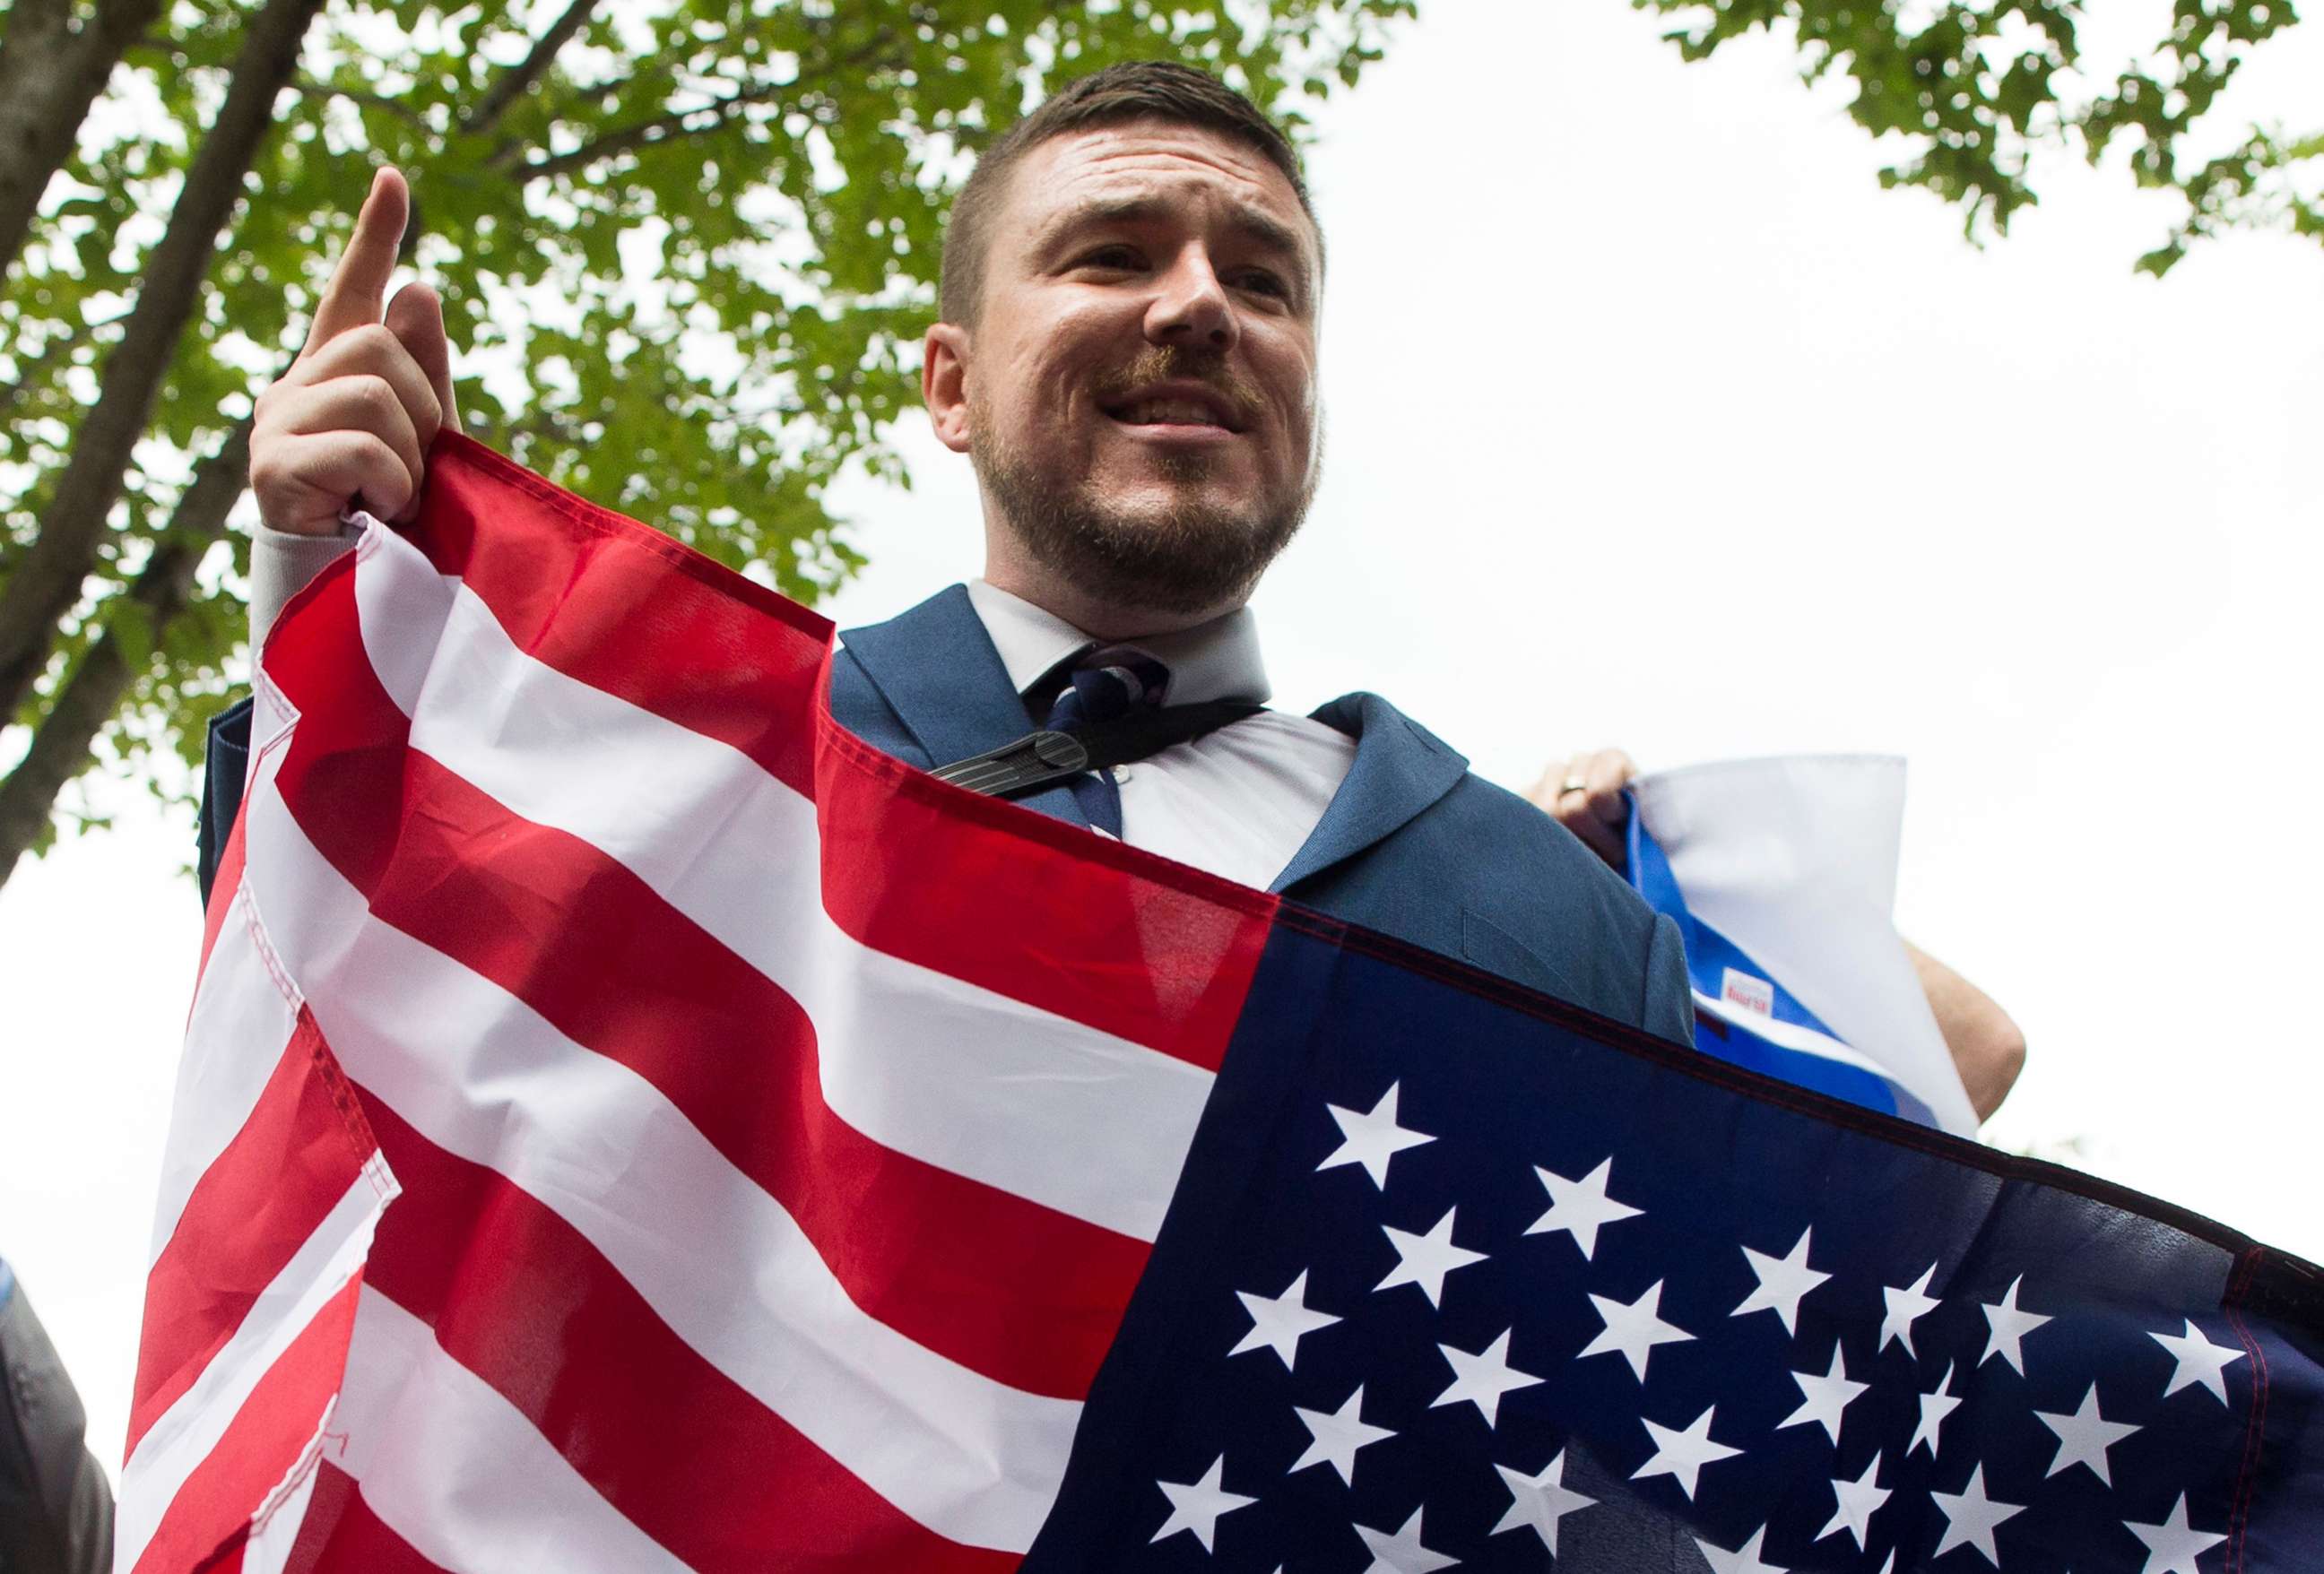 PHOTO: Jason Kessler speaks to members of the news media while holding a U.S. national flag in Lafayette Park across the street from the White House, during the "Unite the Right" rally, Aug. 12, 2018.